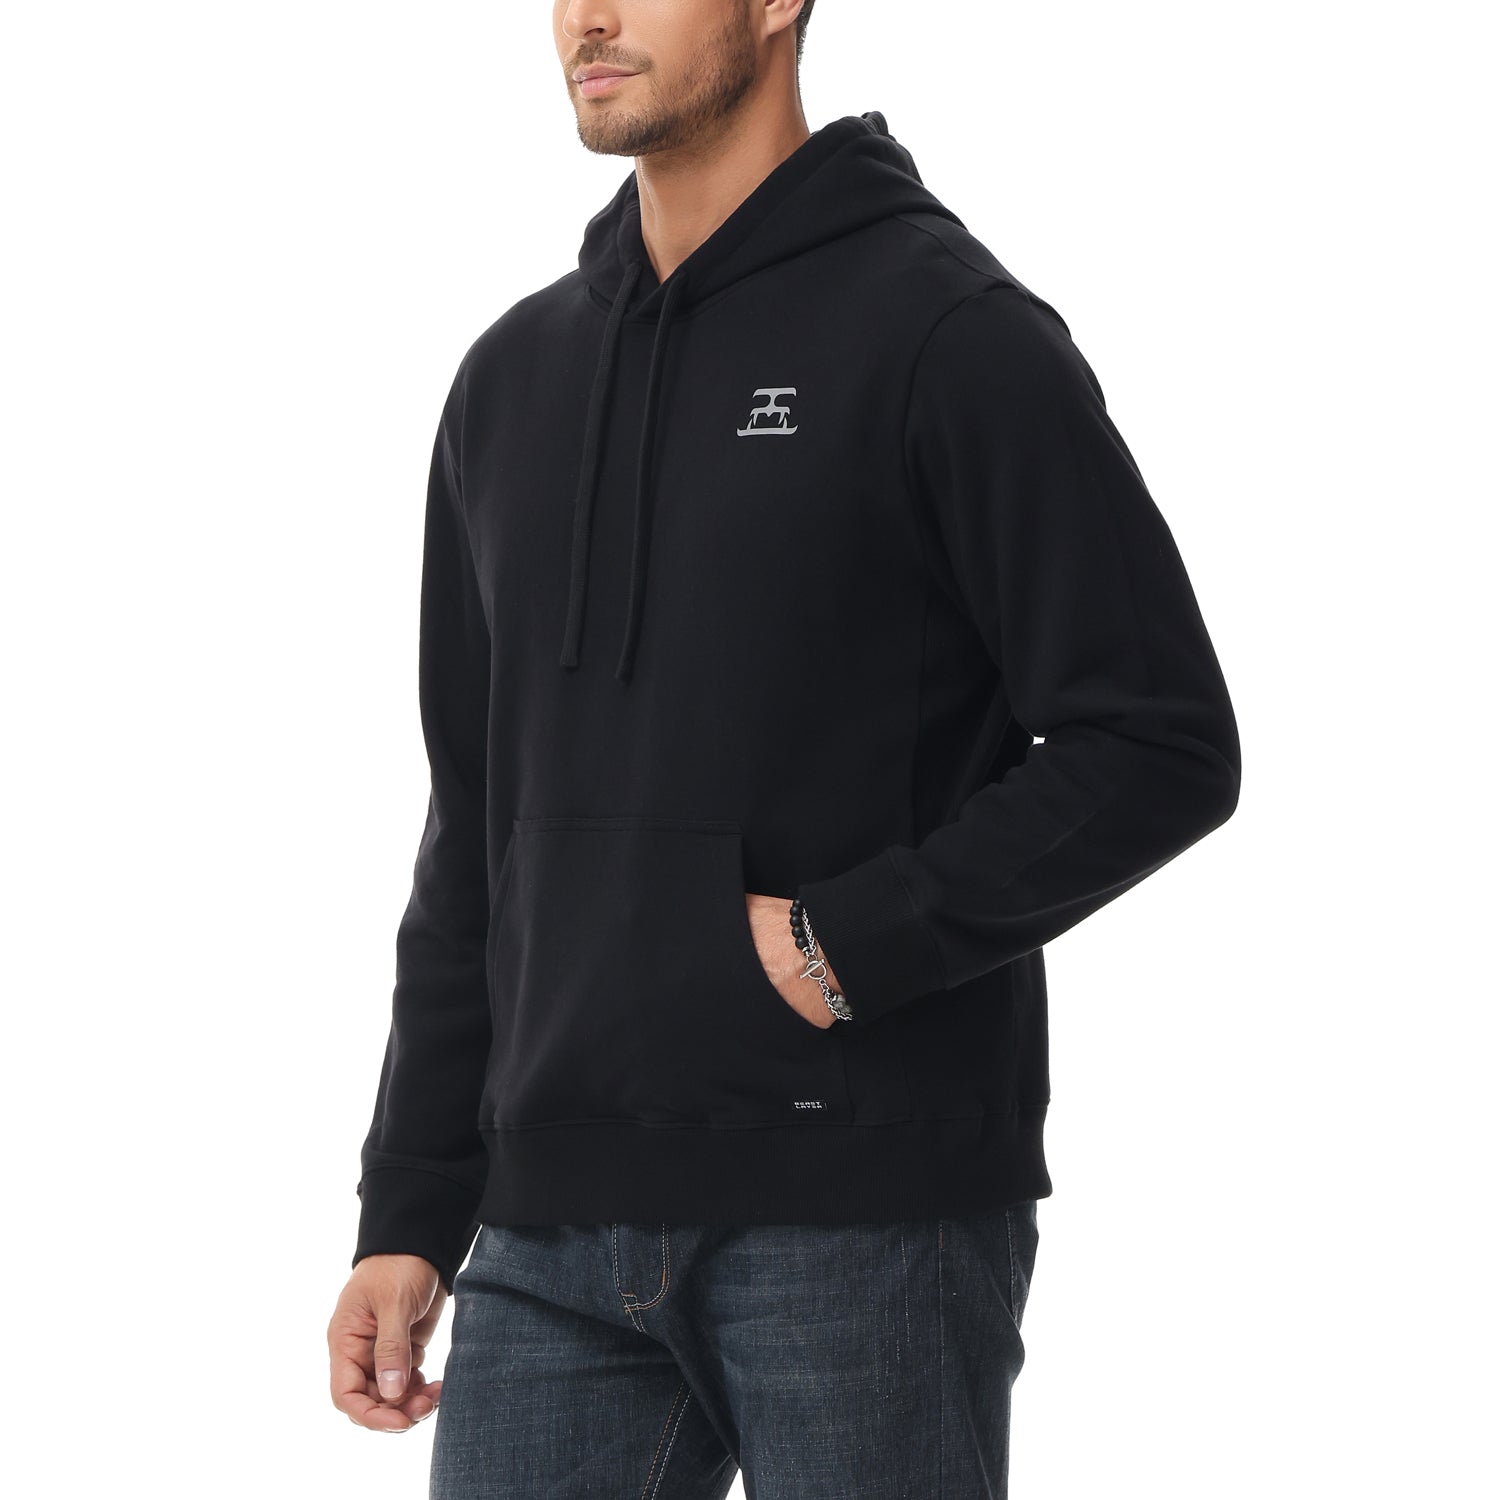 Sports Pullover Casual Sweatshirt With Pouch Pocket-Unisex